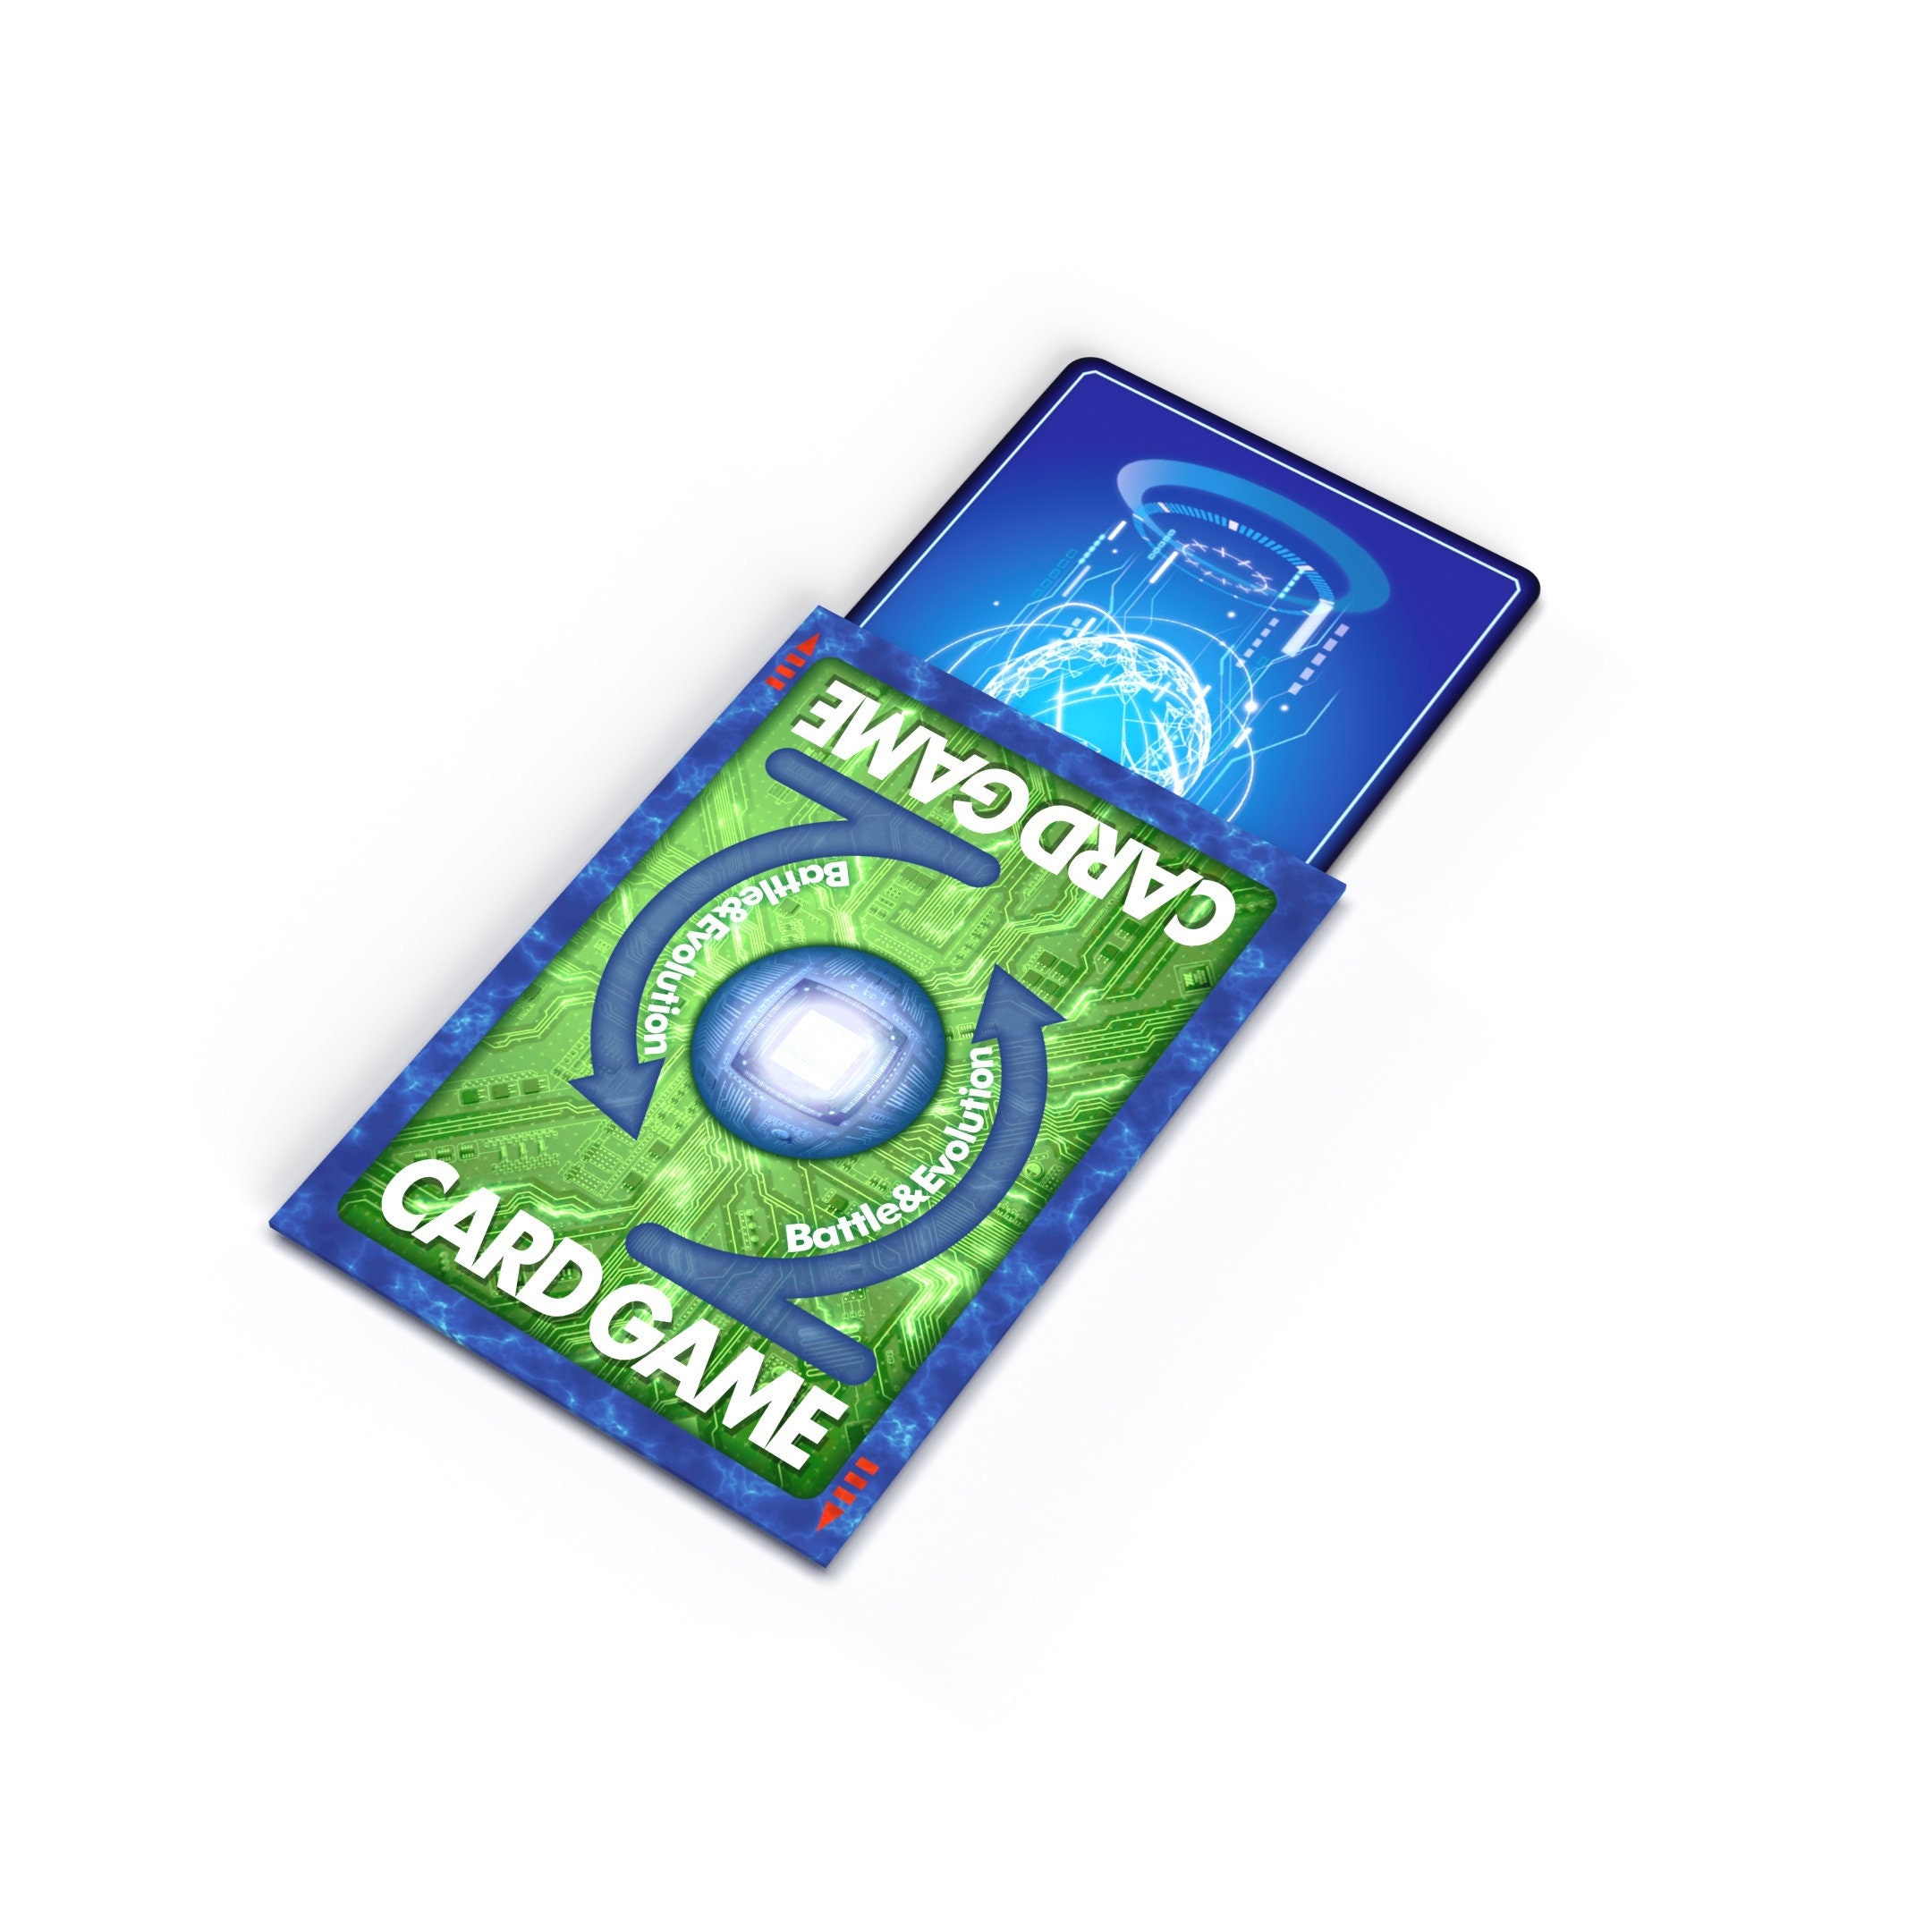 Custom TCG Card sleeves - Customize your sleeves with the Sleeve Crafter